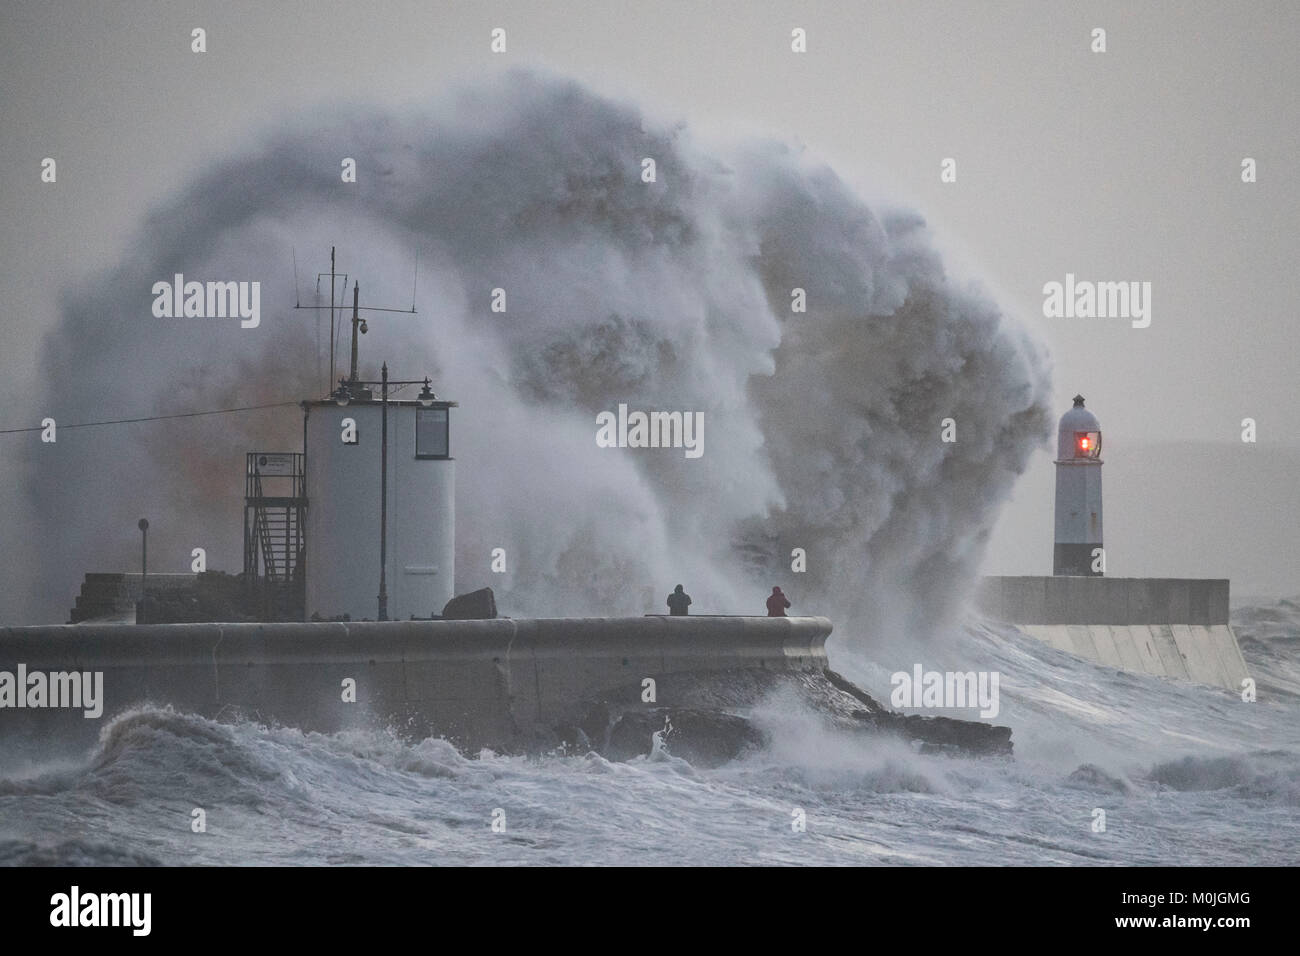 Waves crash against the harbour wall at Porthawl, South Wales, UK during storm Eleanor. The Met Office issued a weather warning for strong winds. Stock Photo